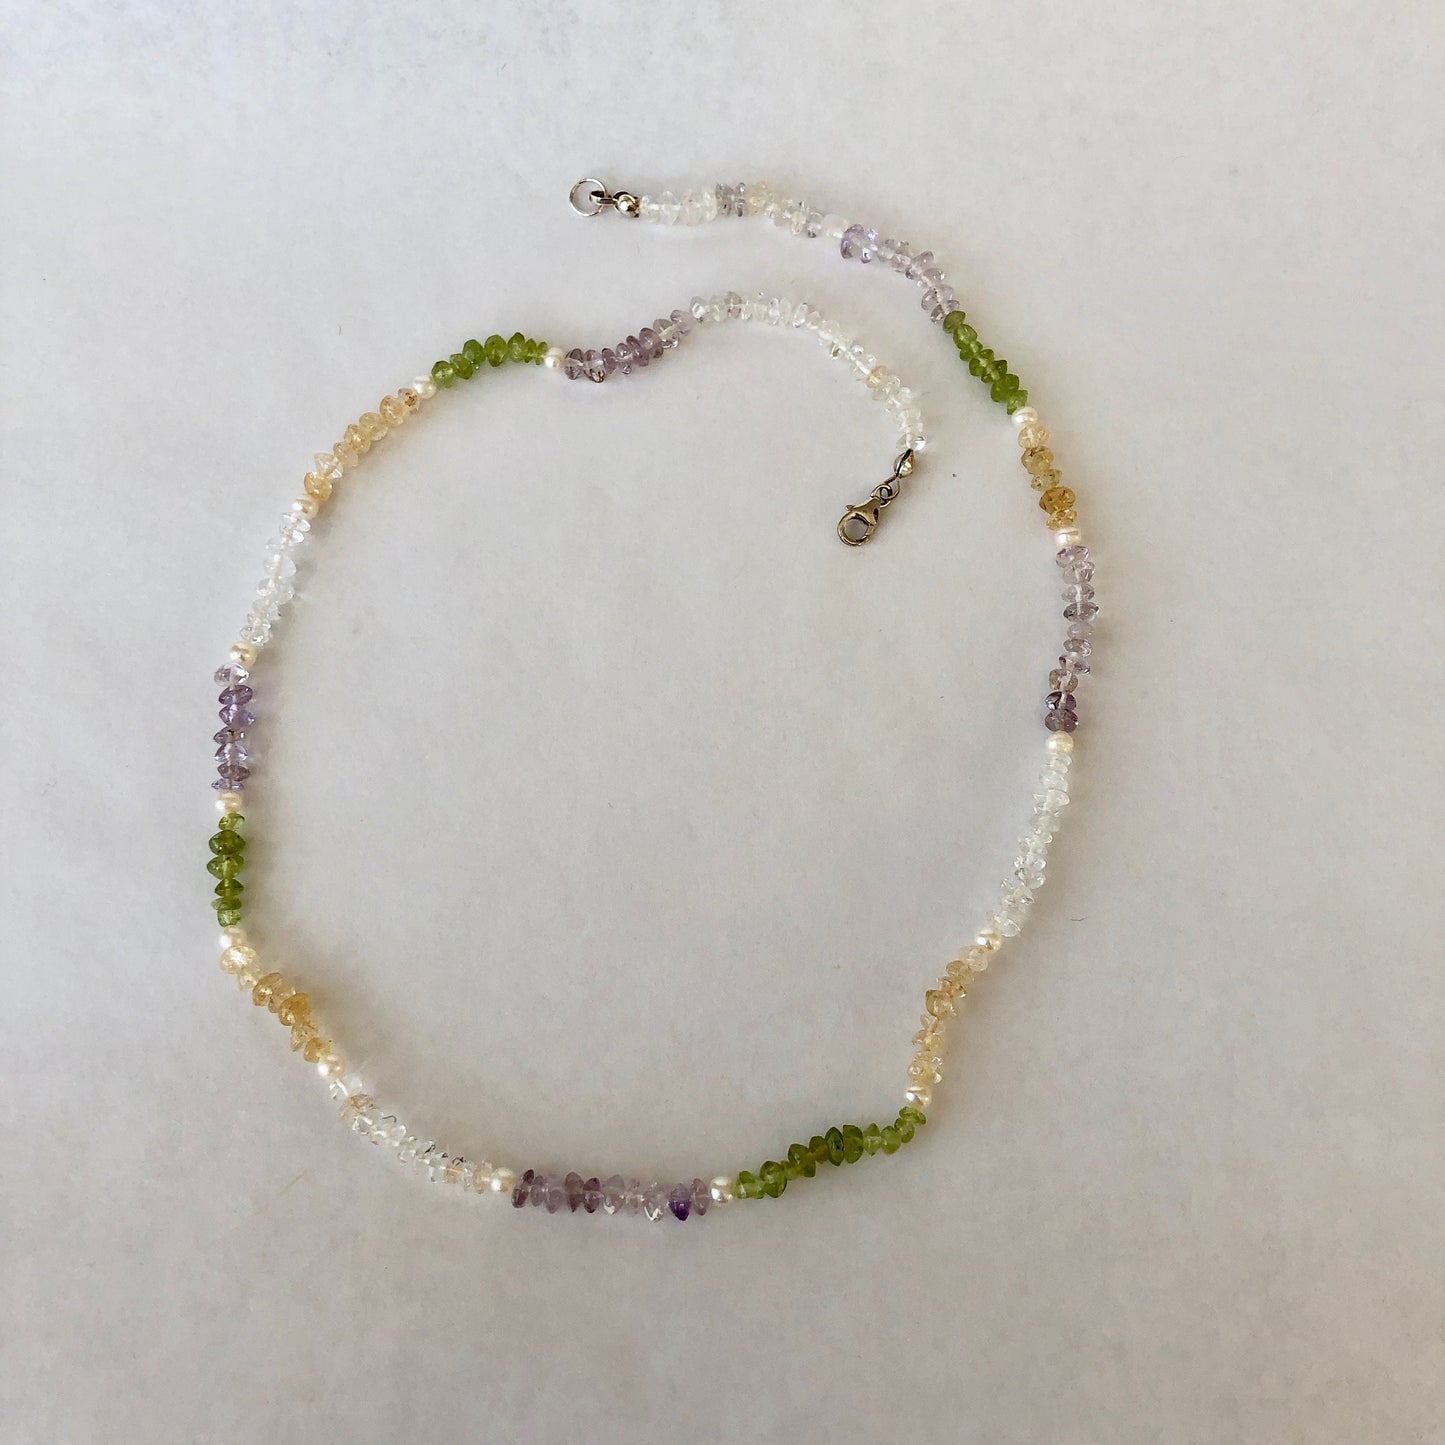 Soft and lovely Fluorite stone and pearl necklace, 19 " long, finished with a perfect sterling silver clasp.